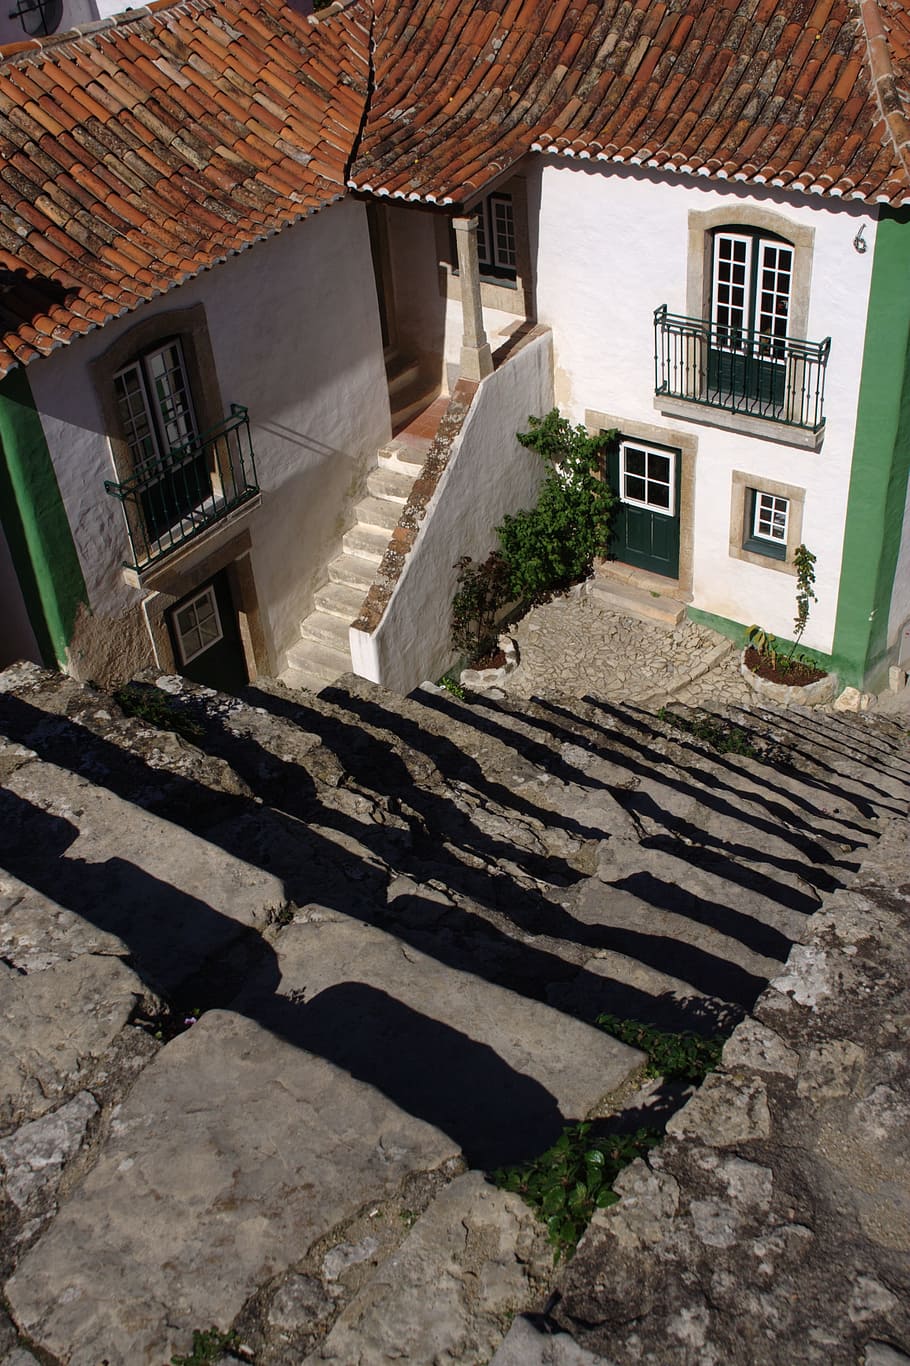 portugal, óbidos, stairs, historically, architecture, built structure, building exterior, building, sunlight, residential district